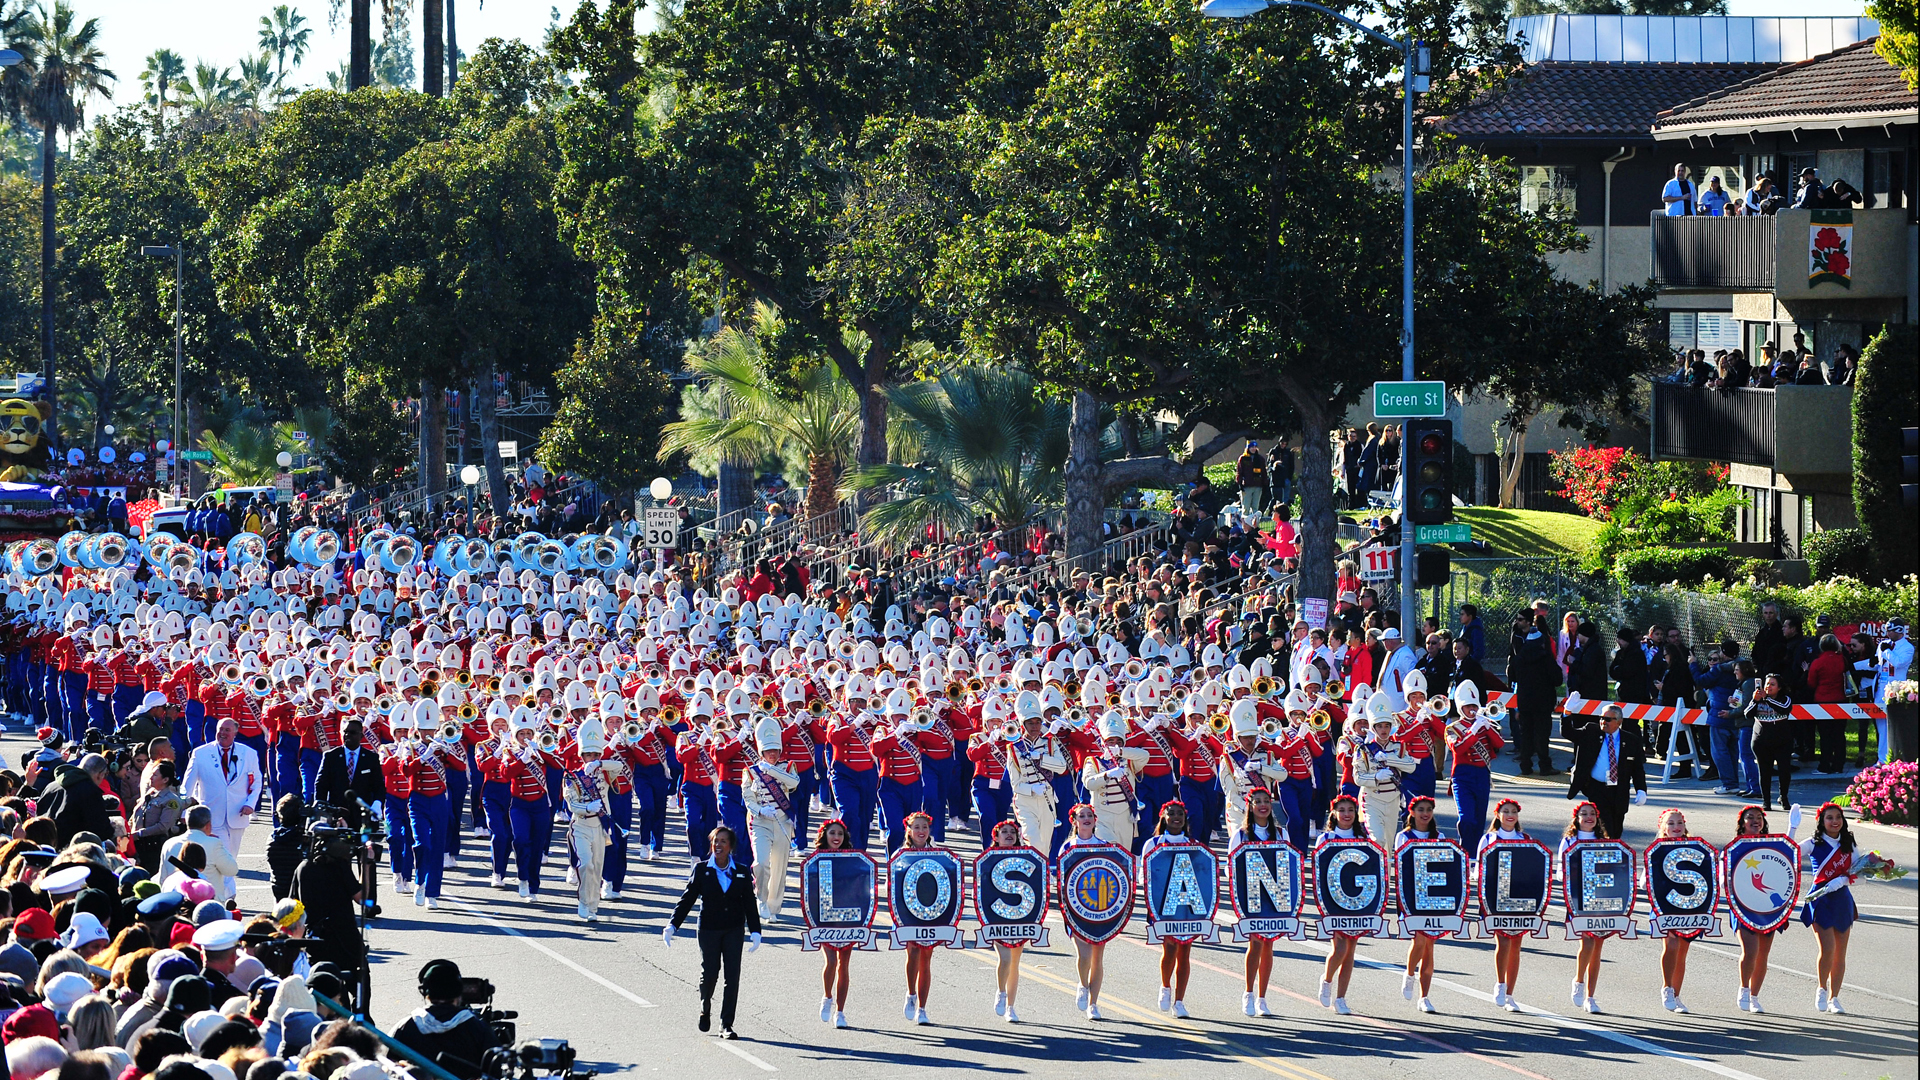 The Los Angeles Unified School District All City Honor Marching band participates in the 130th Rose Parade Presented by Honda on Jan. 1, 2019, in Pasadena, California. (Credit: Jerod Harris/Getty Images)